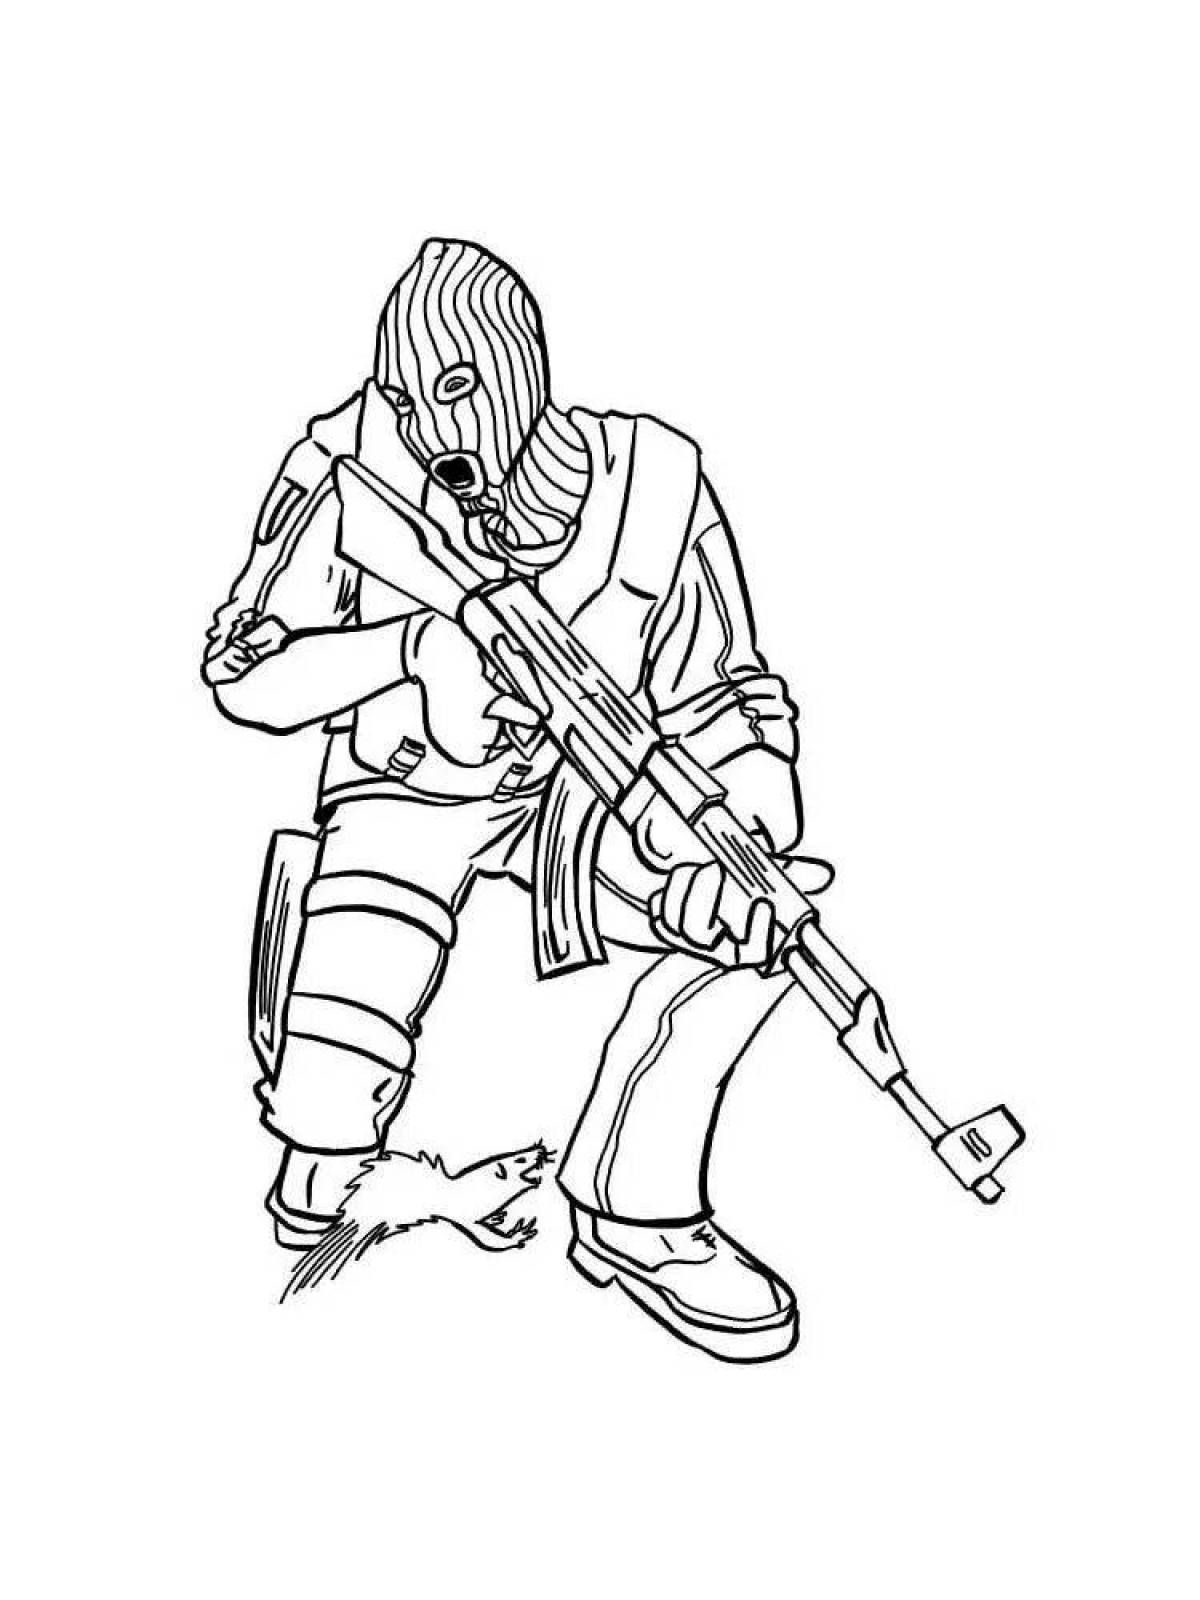 Photo Fun standoff 2 skins coloring page